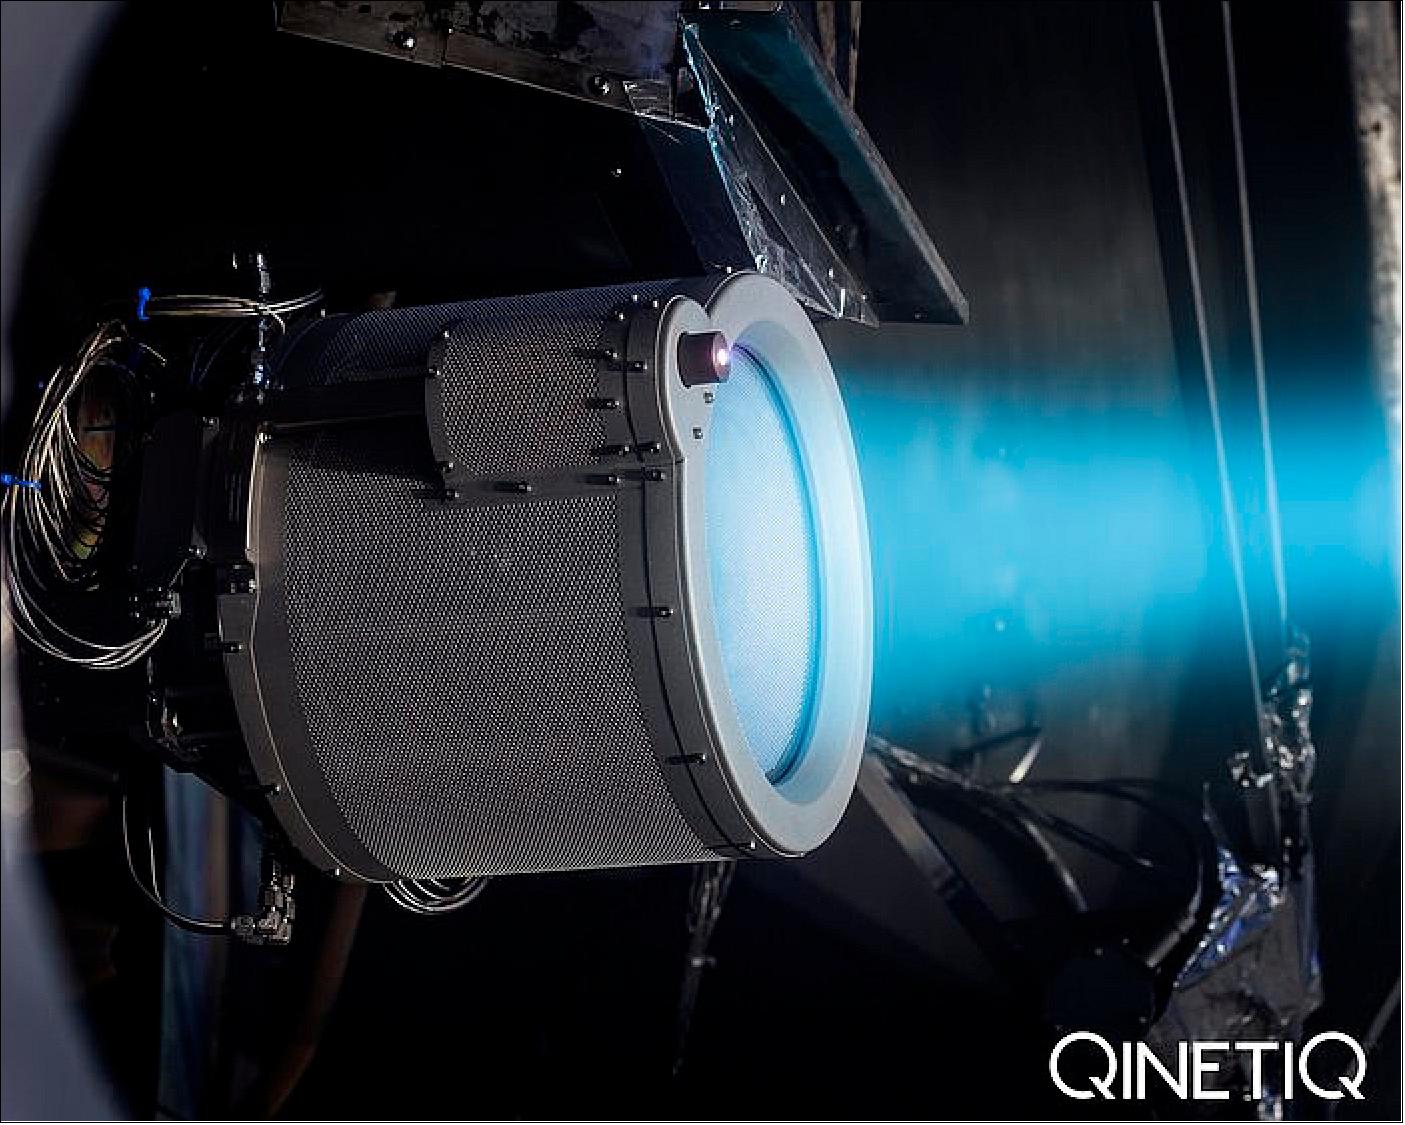 Figure 52: T6 gridded ion thruster being test fired in October 2018 inside the LEEP2 vacuum chamber at QinetiQ in Farnborough, UK. In space the plume seen here would not be visible; it occurs due to vestigial gases building up inside the chamber. The glow from the thruster would be visible however (image credit: QinetiQ)